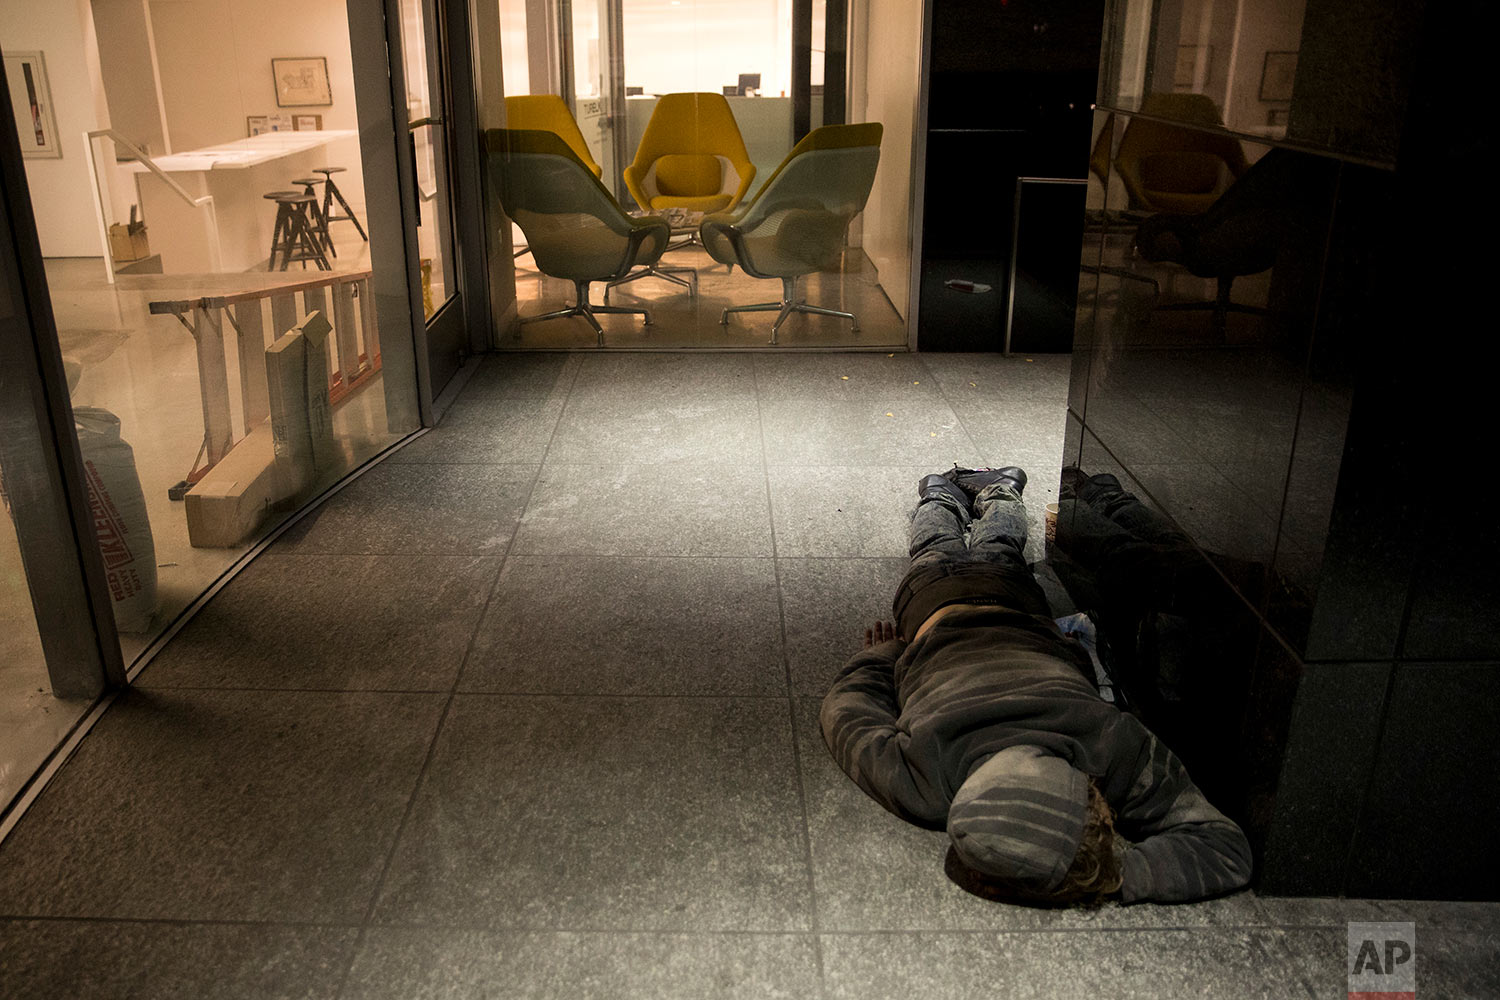  A homeless man sleeps on a concrete floor outside an office building under renovation Friday, Dec. 1, 2017, in Los Angeles. The U.S. Department on Housing and Urban Development release of the 2017 homeless numbers are expected to show a dramatic inc